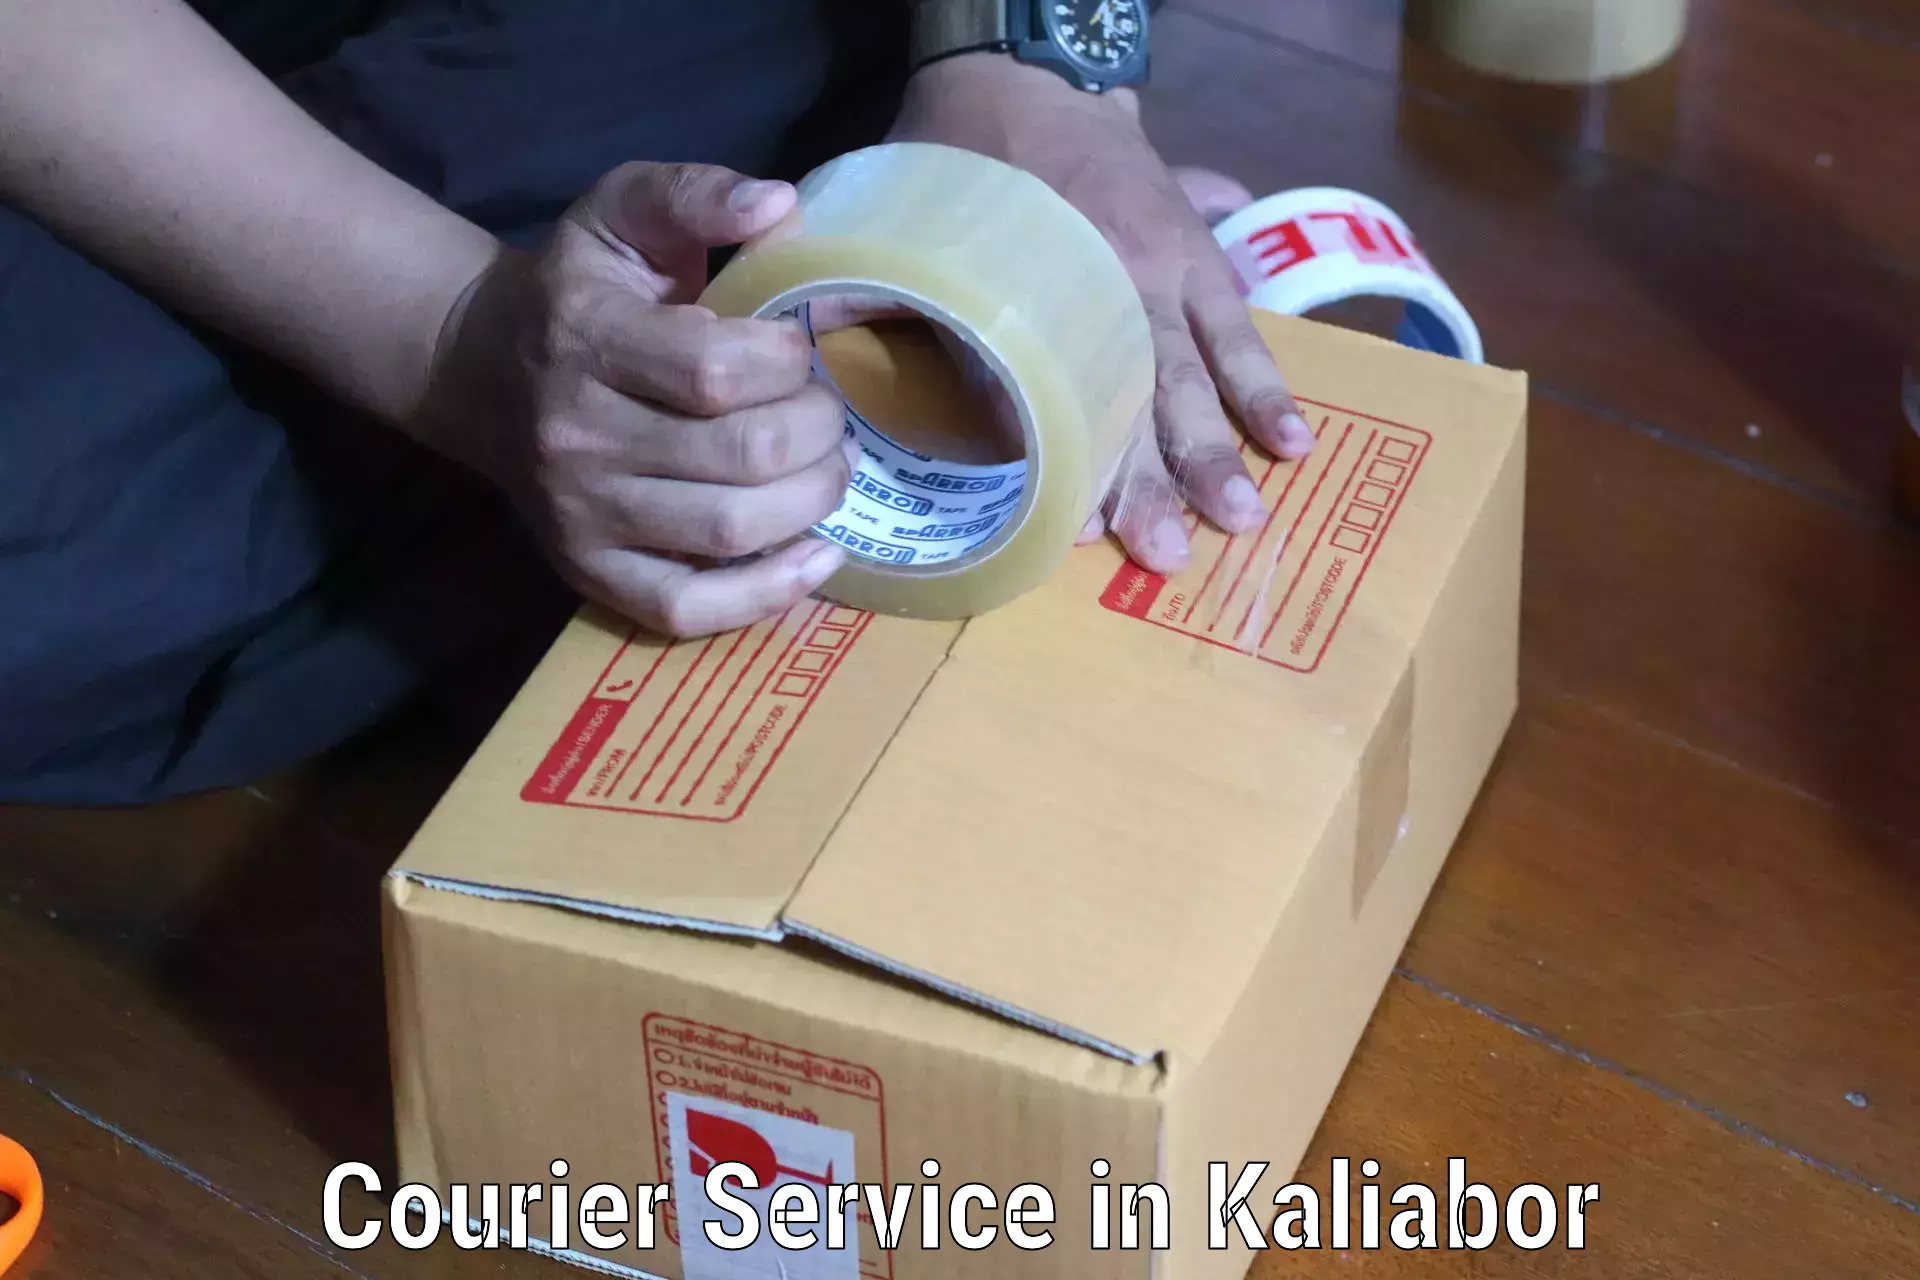 Retail shipping solutions in Kaliabor